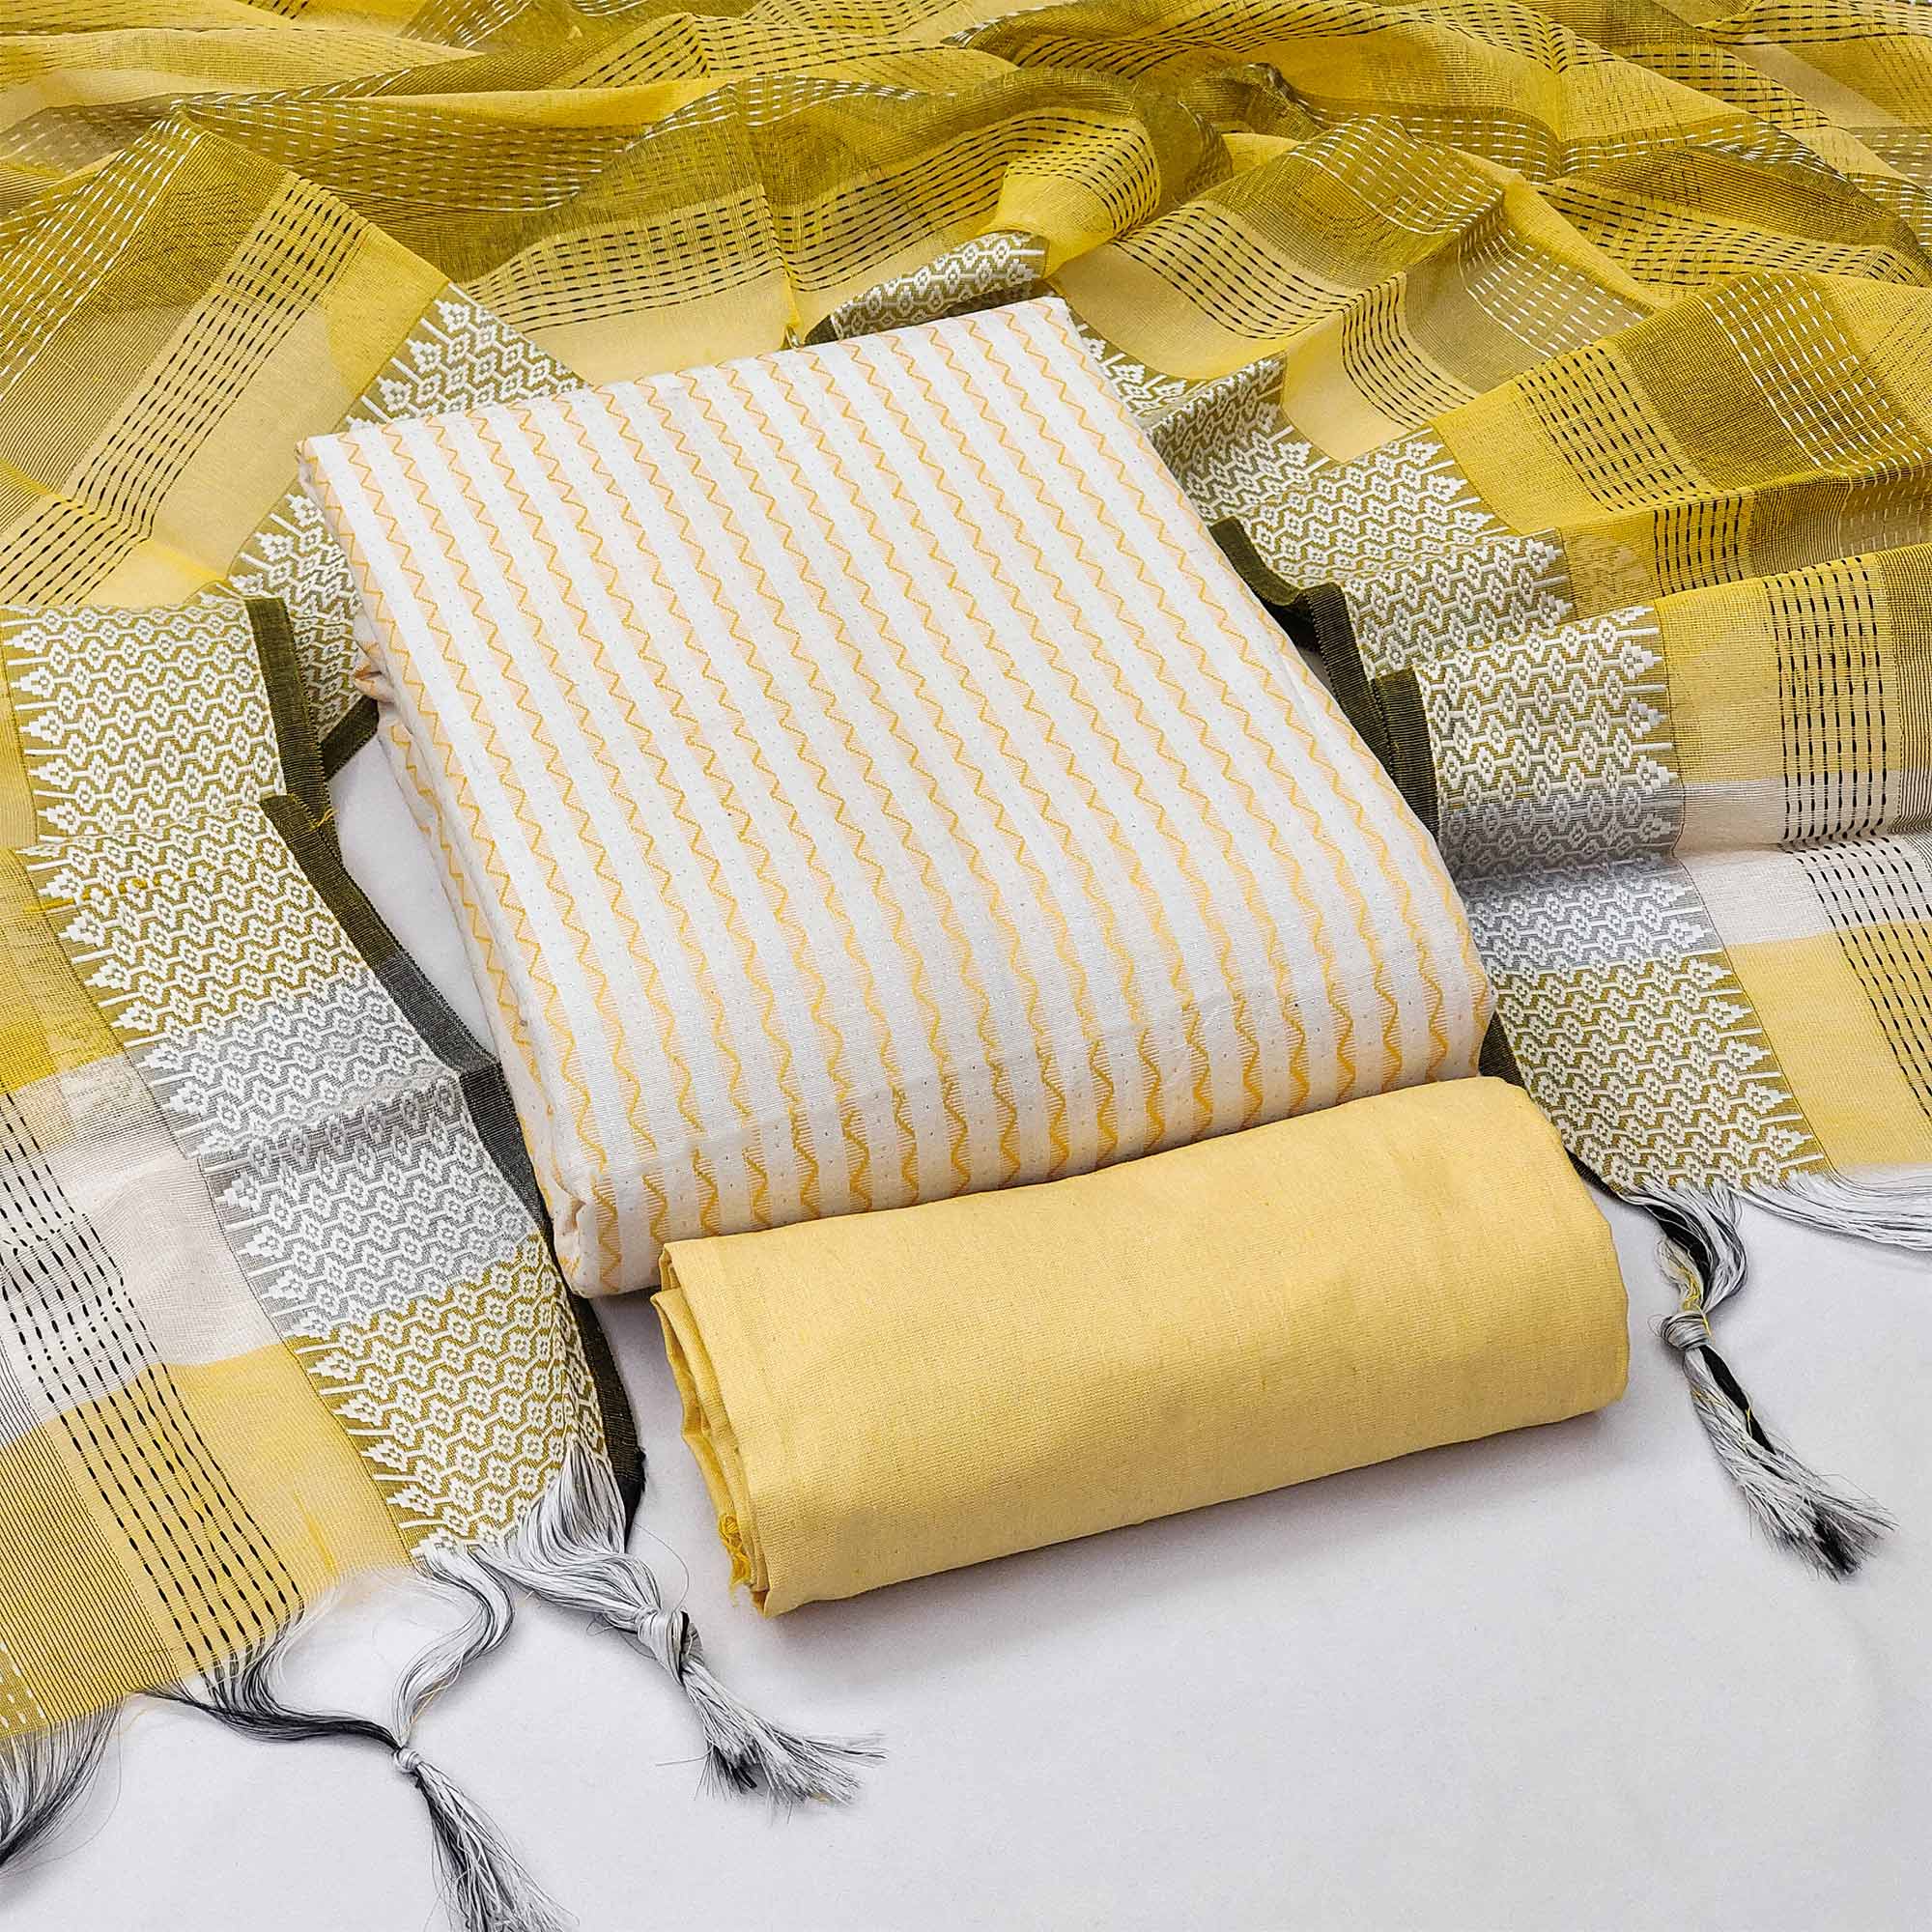 Yellow Striped Printed With Woven Cotton Blend Dress Material